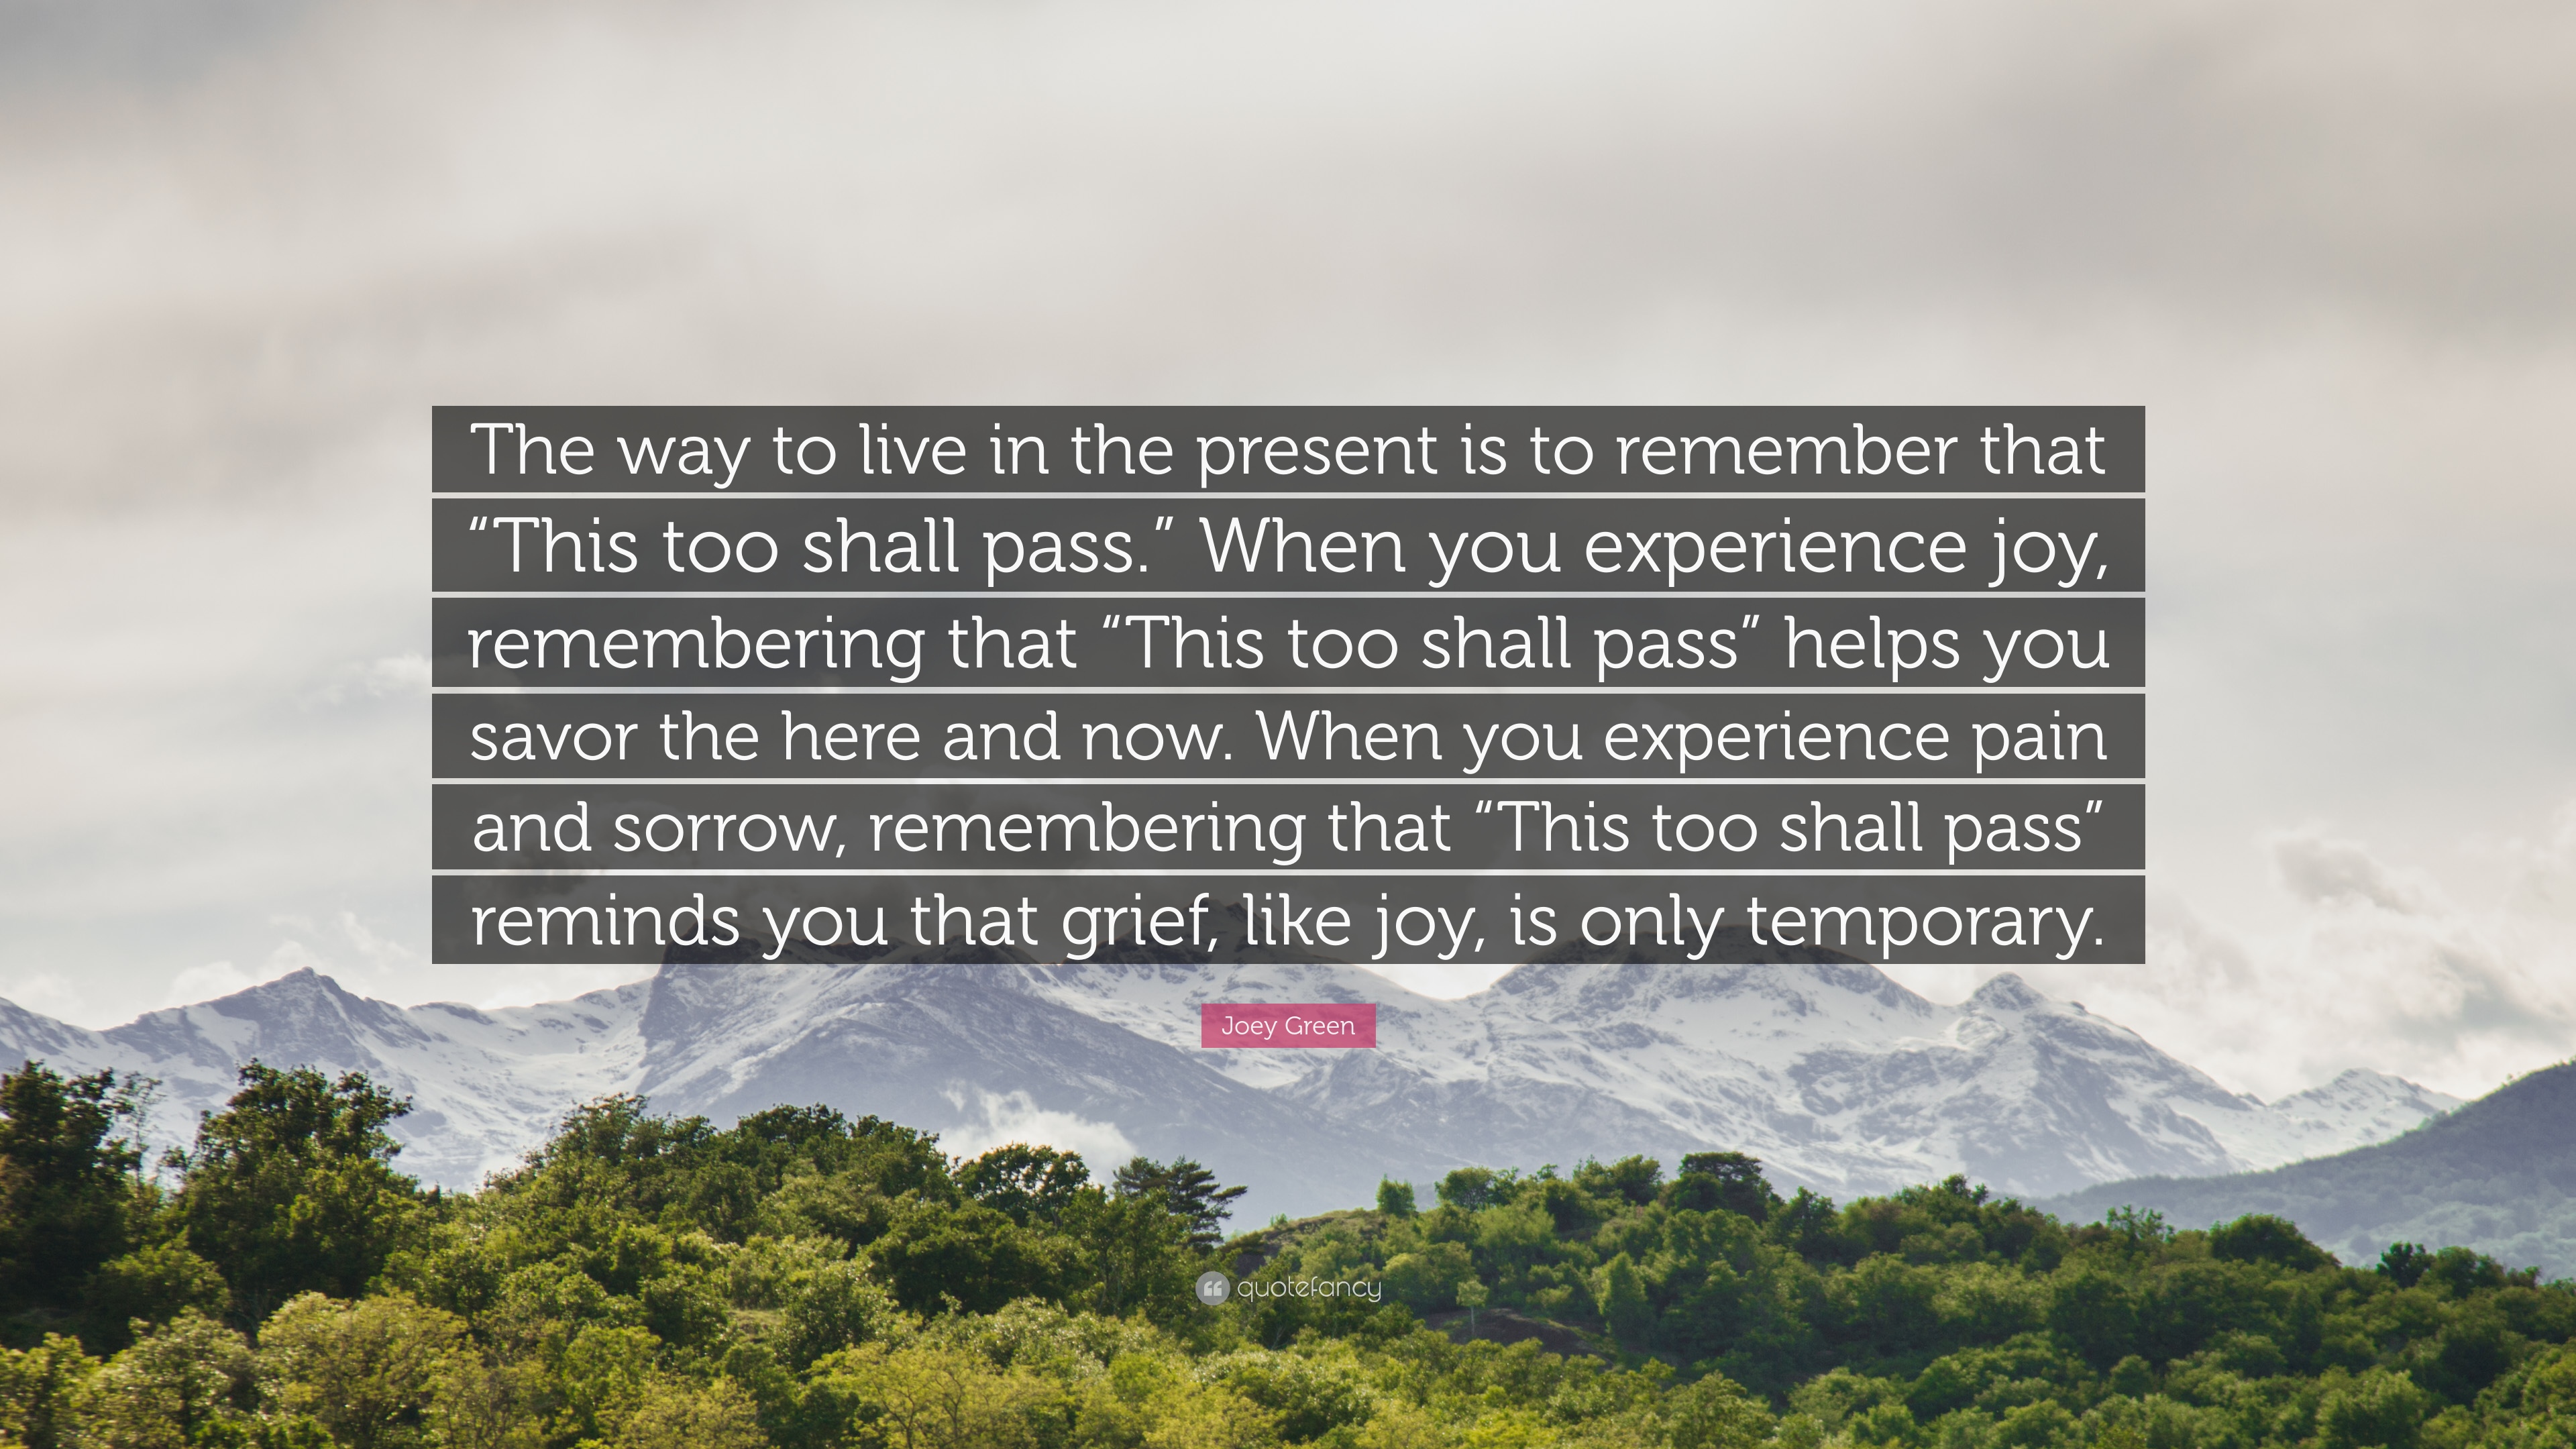 Joey Green Quote: “The way to live in the present is to remember that “This too shall pass.” When you experience joy, remembering that “Thi.”